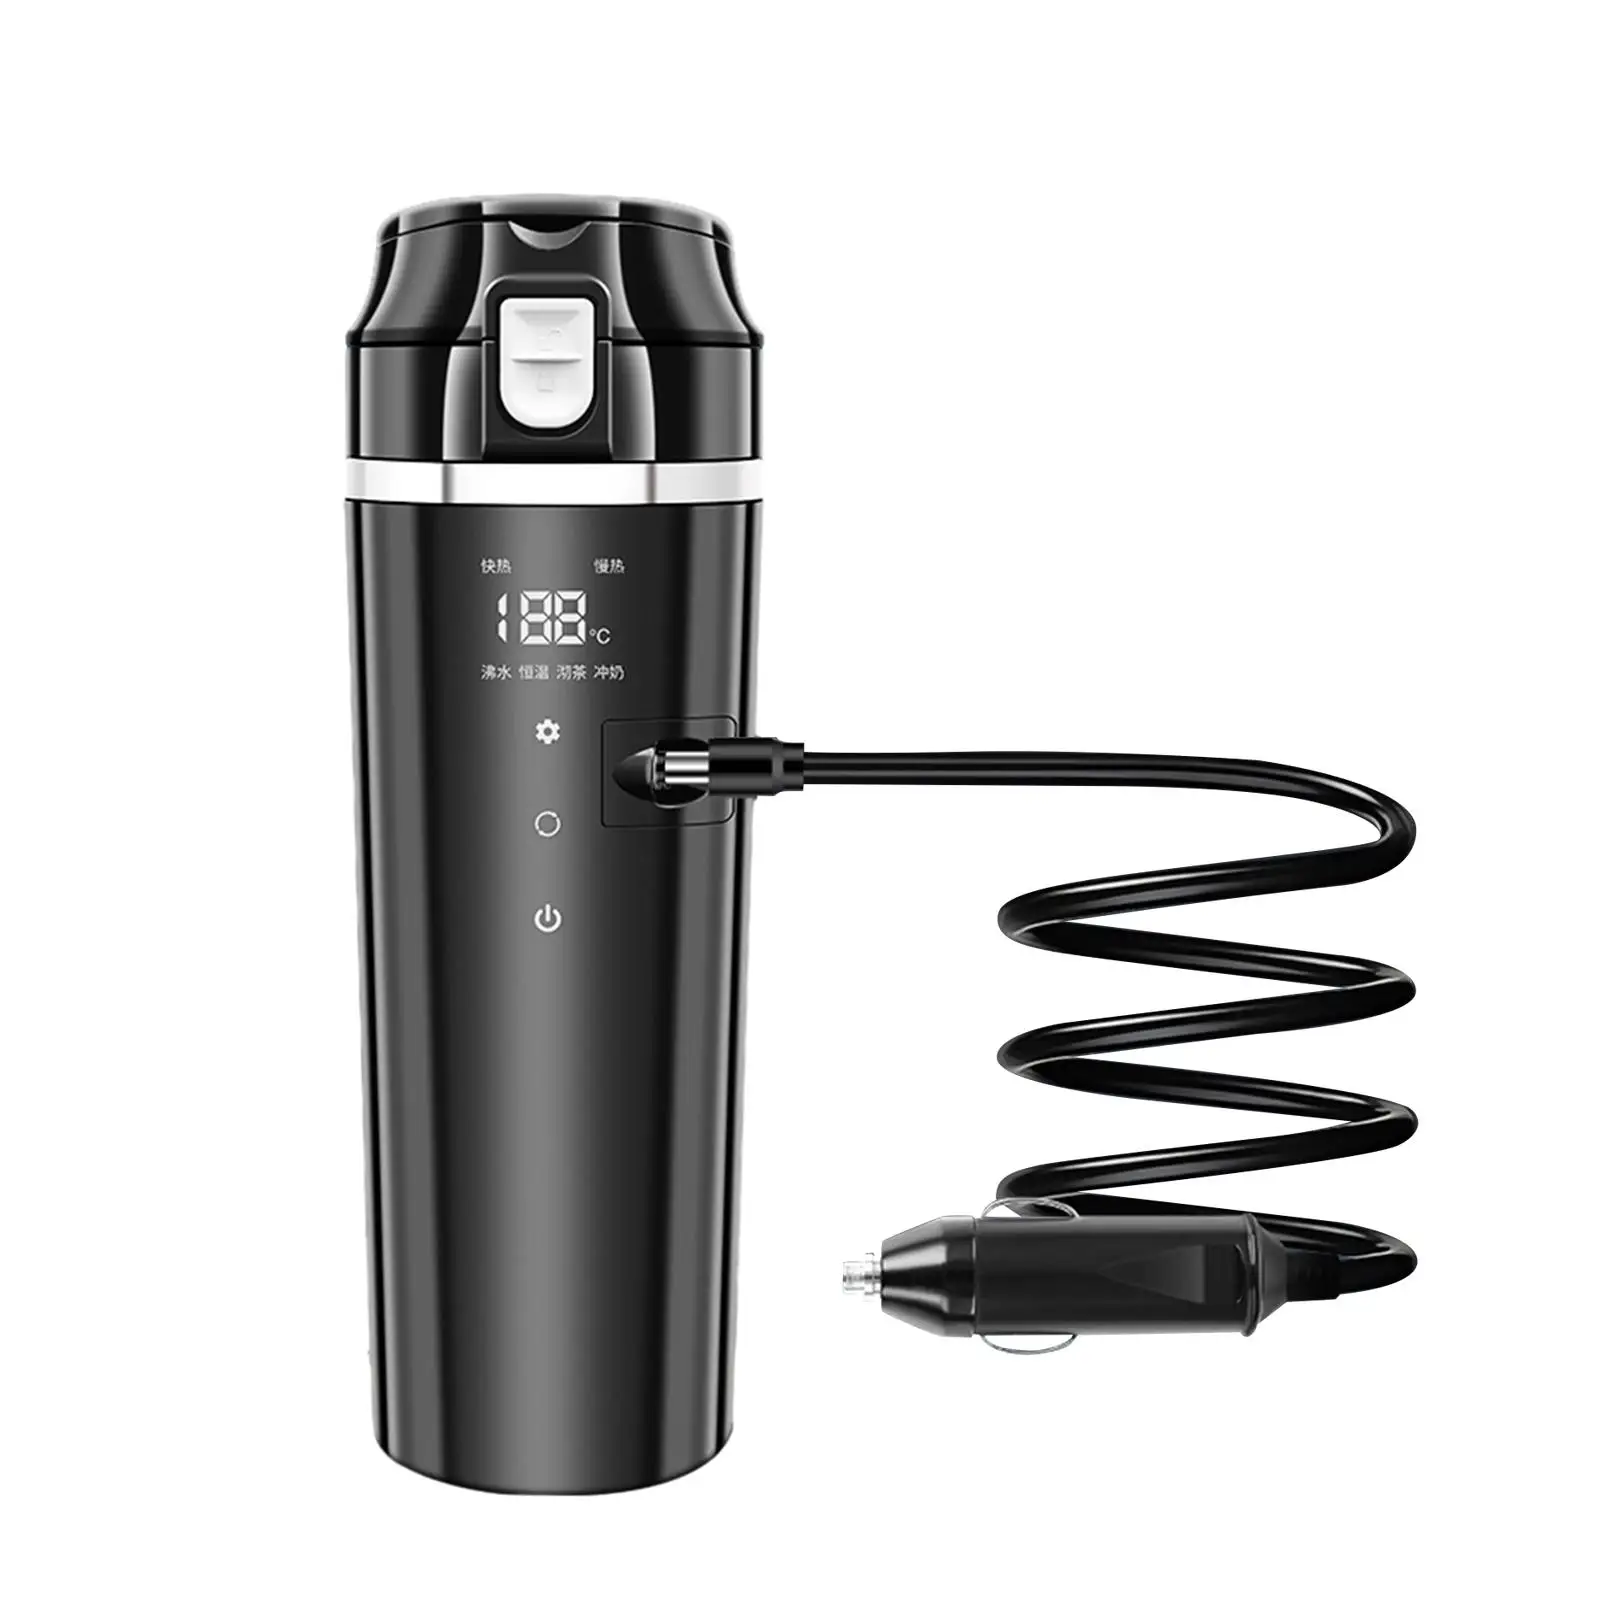 12V 24V 500ml Car Electric Water Kettle Stainless Steel for Tea Coffee